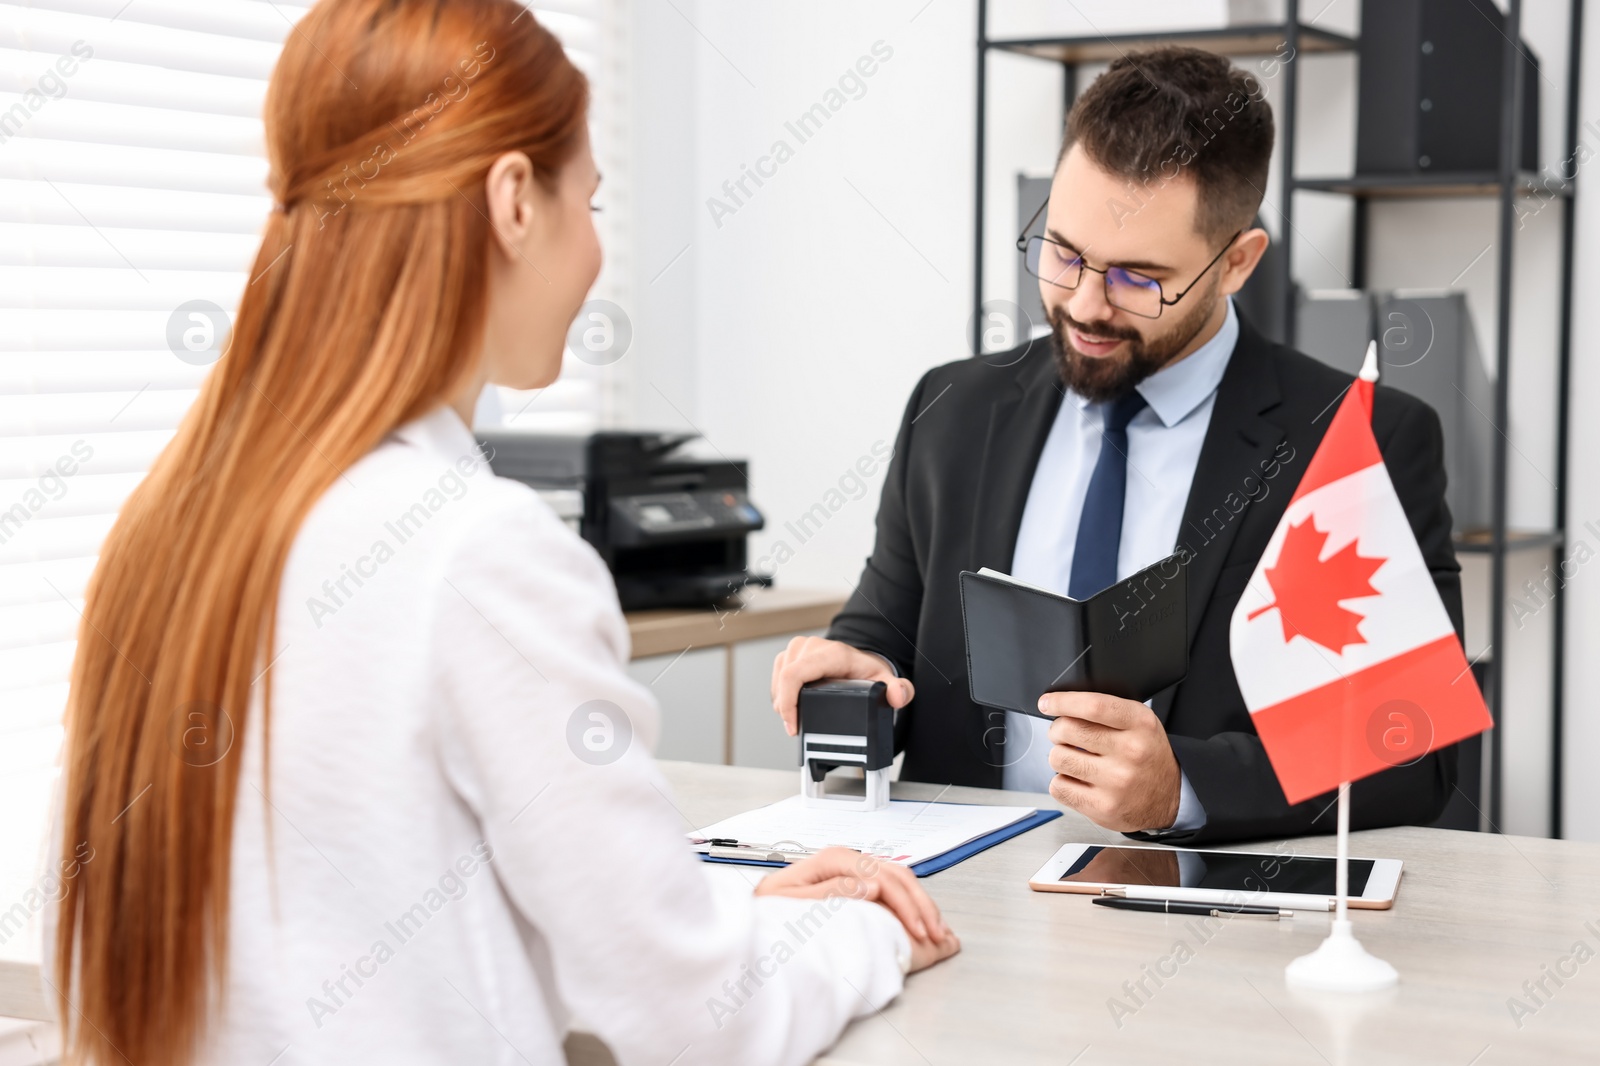 Photo of Immigration to Canada. Smiling embassy worker approving woman's visa application form in office